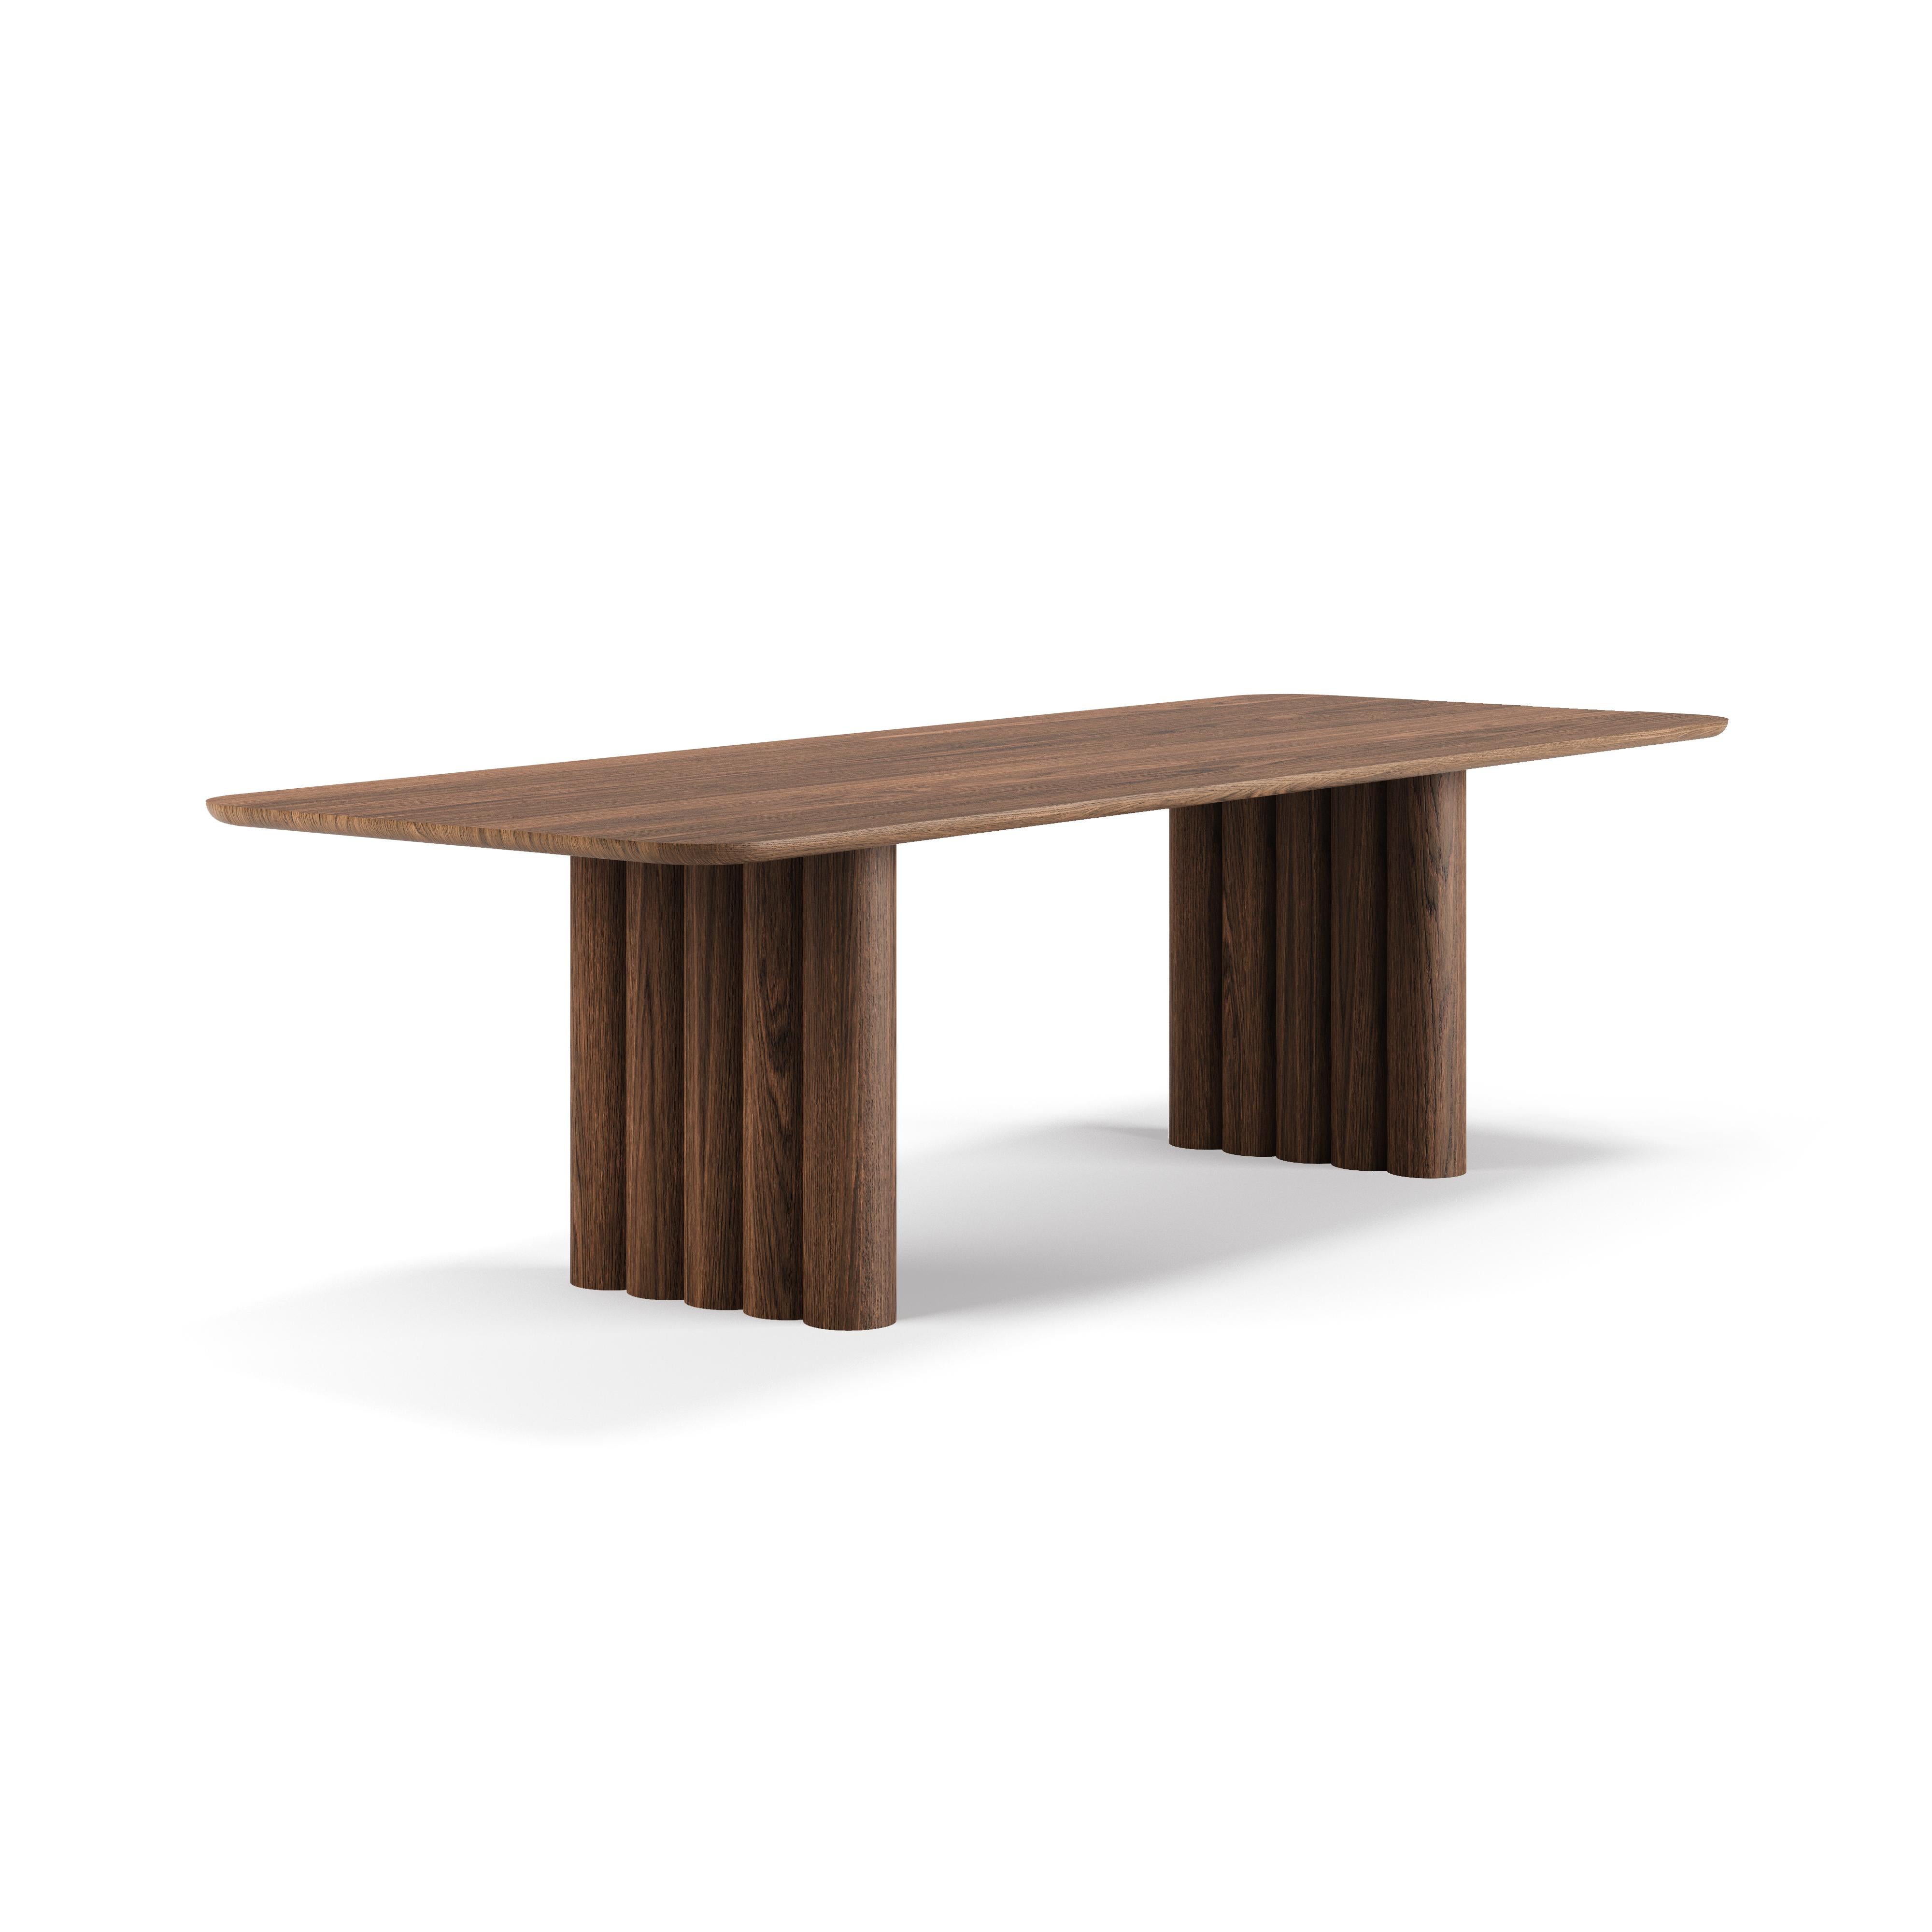 Scandinavian Modern Contemporary Dining Table 'Plush' by Dk3, Smoked Oak or Walnut, 300, Rectangular For Sale